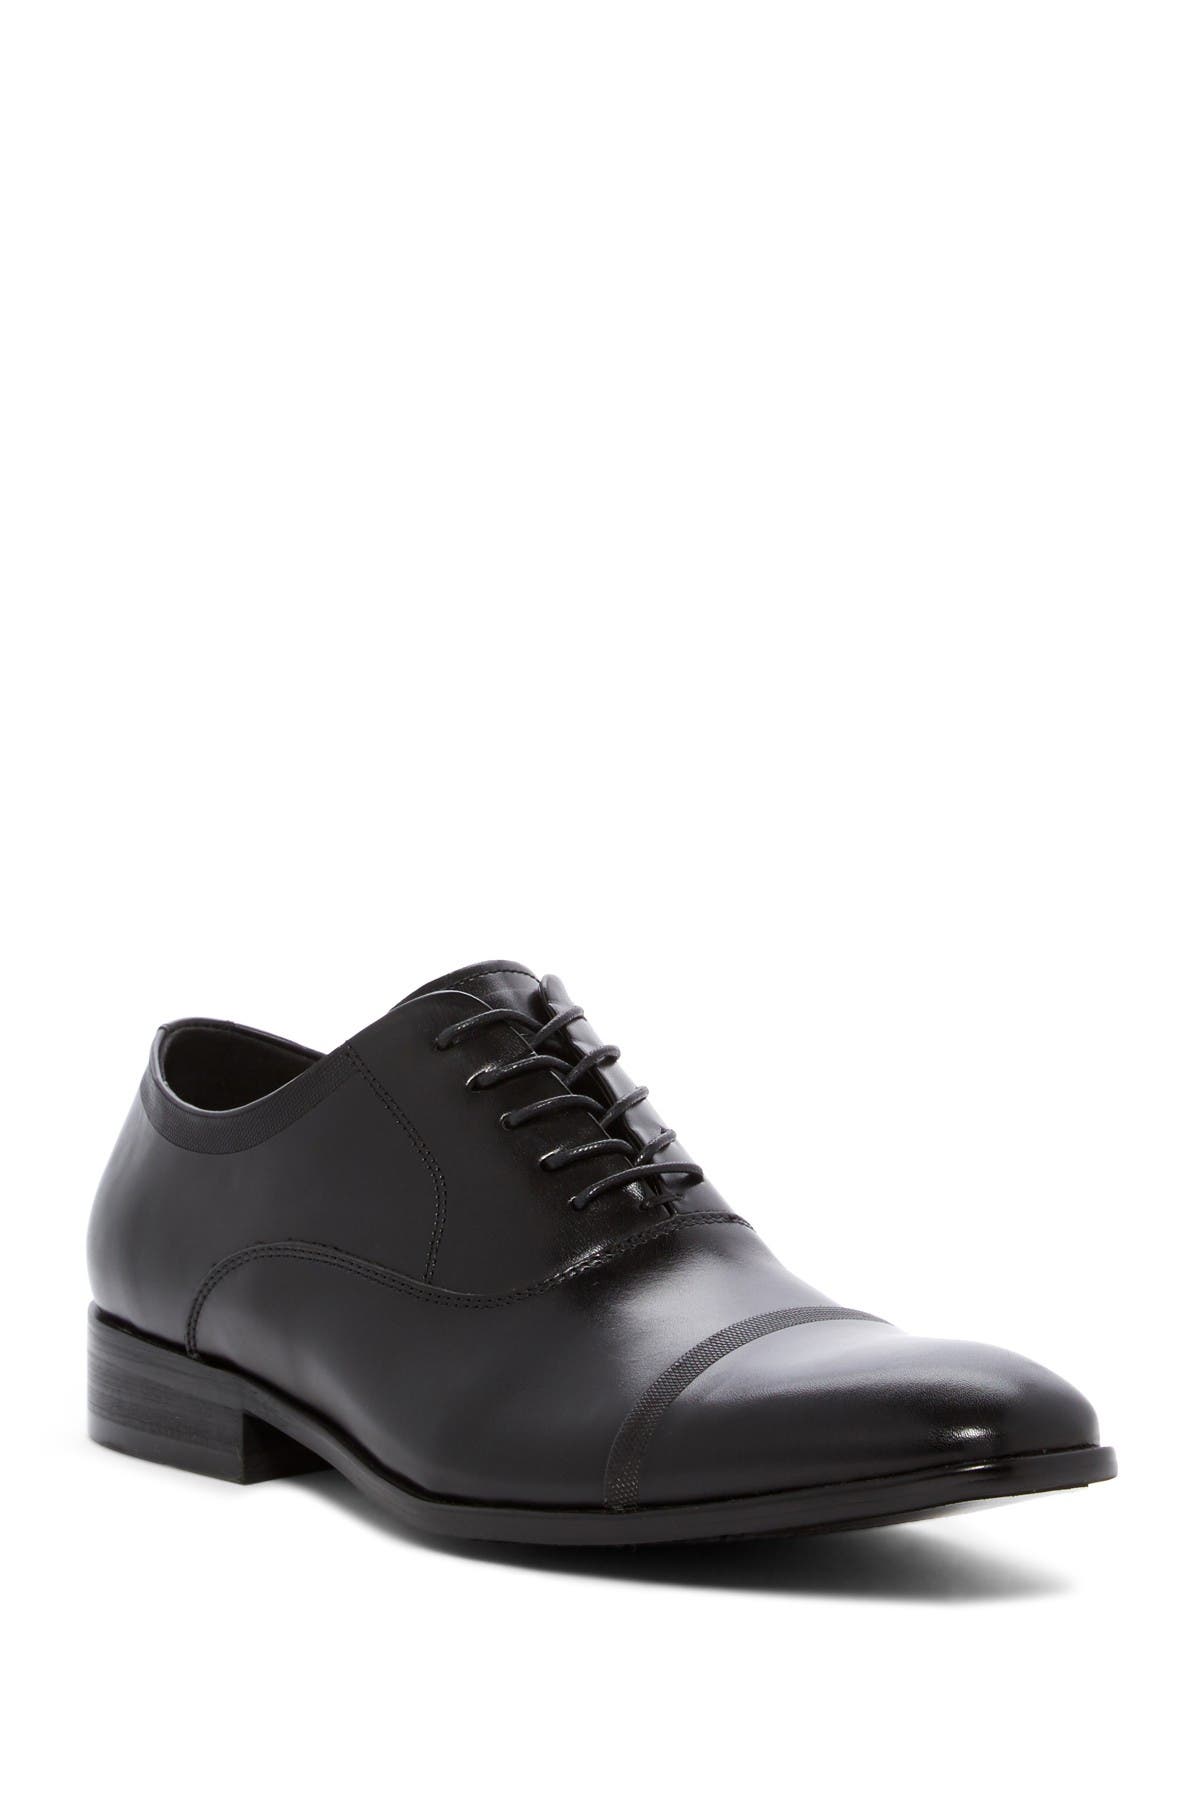 Kenneth Cole Reaction | Leather Cap Toe 